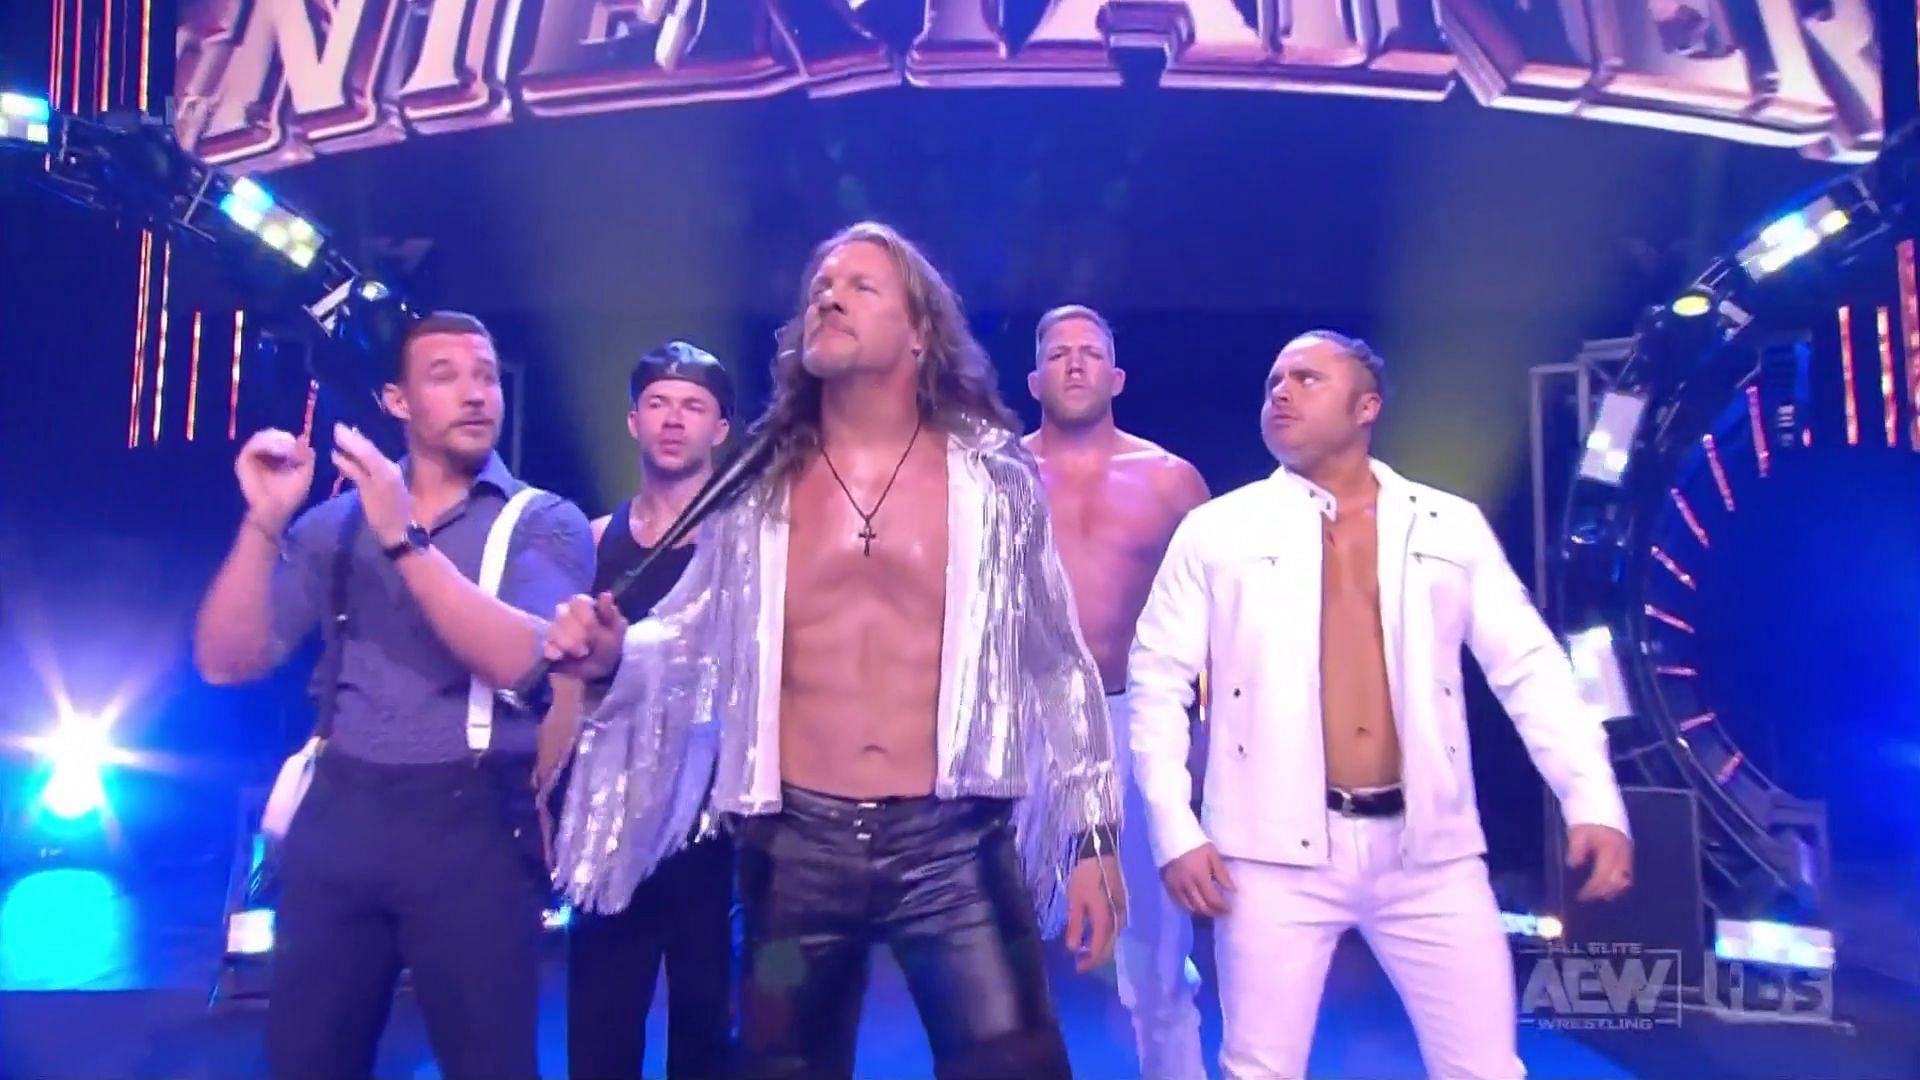 The Jericho Appreciation Society is taking over AEW!